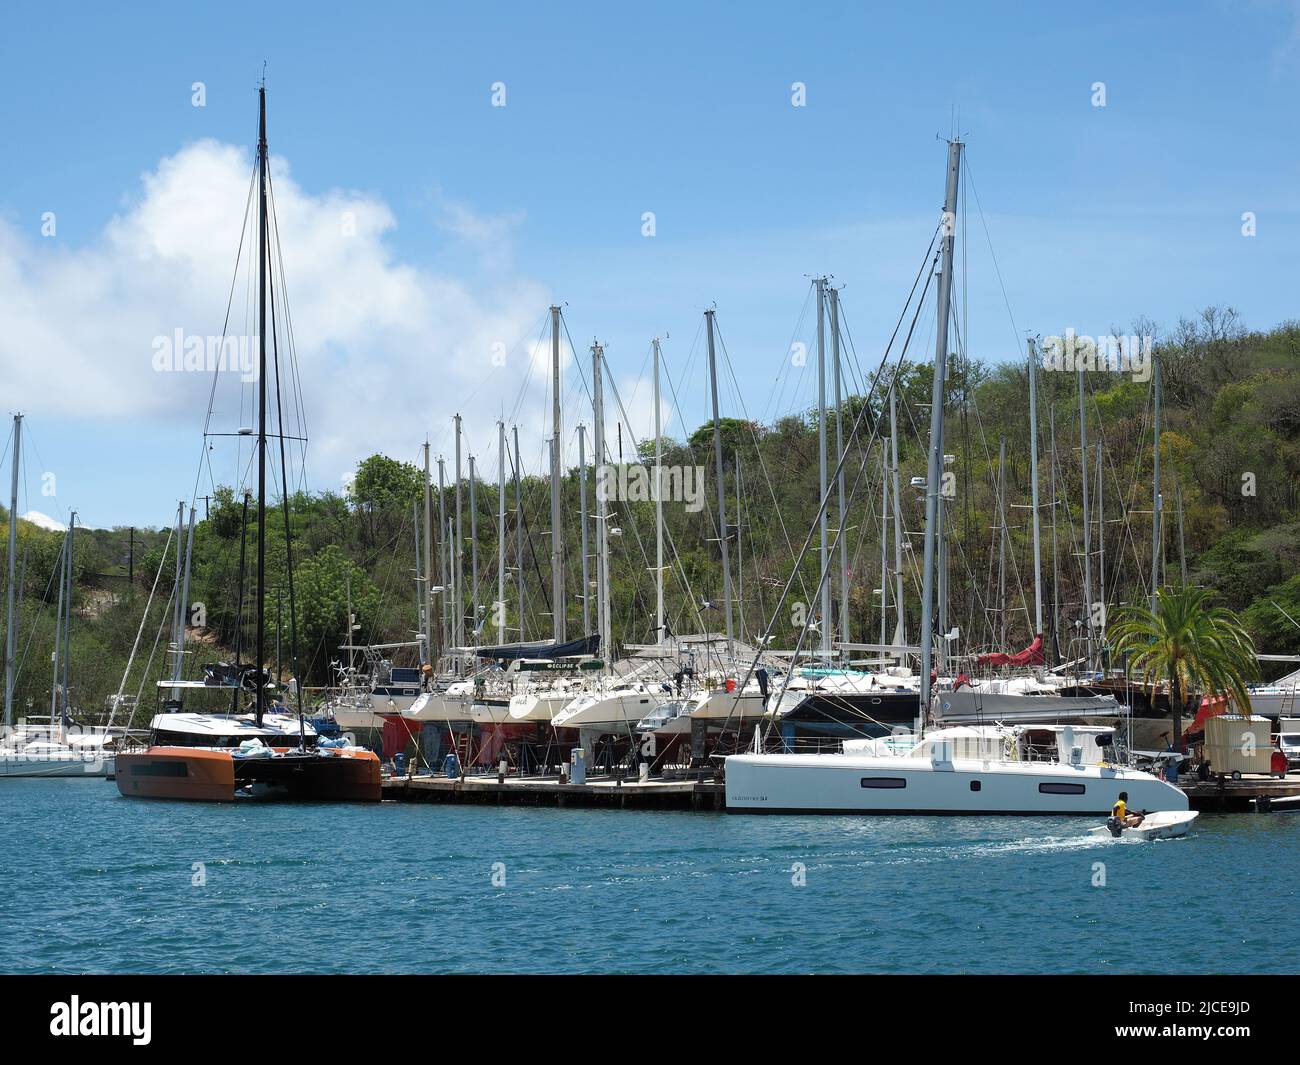 View of the boatyard in English Harbour in Antigua with yachts and other boats docked for maintenance Stock Photo